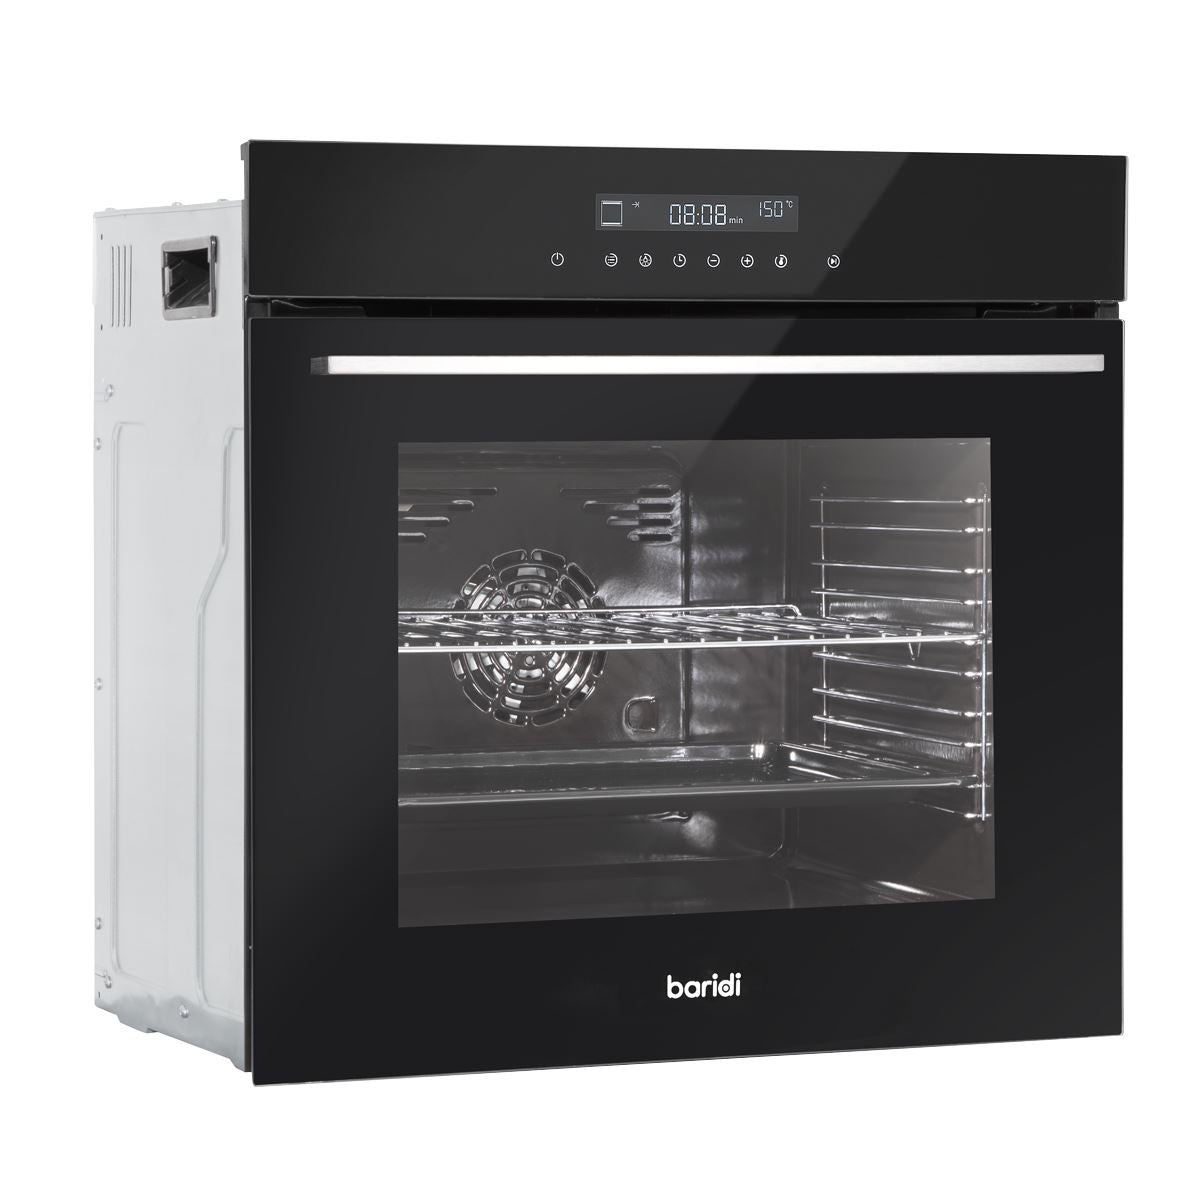 Sealey Baridi 60cm Built-In Fan Assisted, Single, Integrated 10 Function Electric Oven, Touchscreen Controls, 72L Capacity, Black DH199